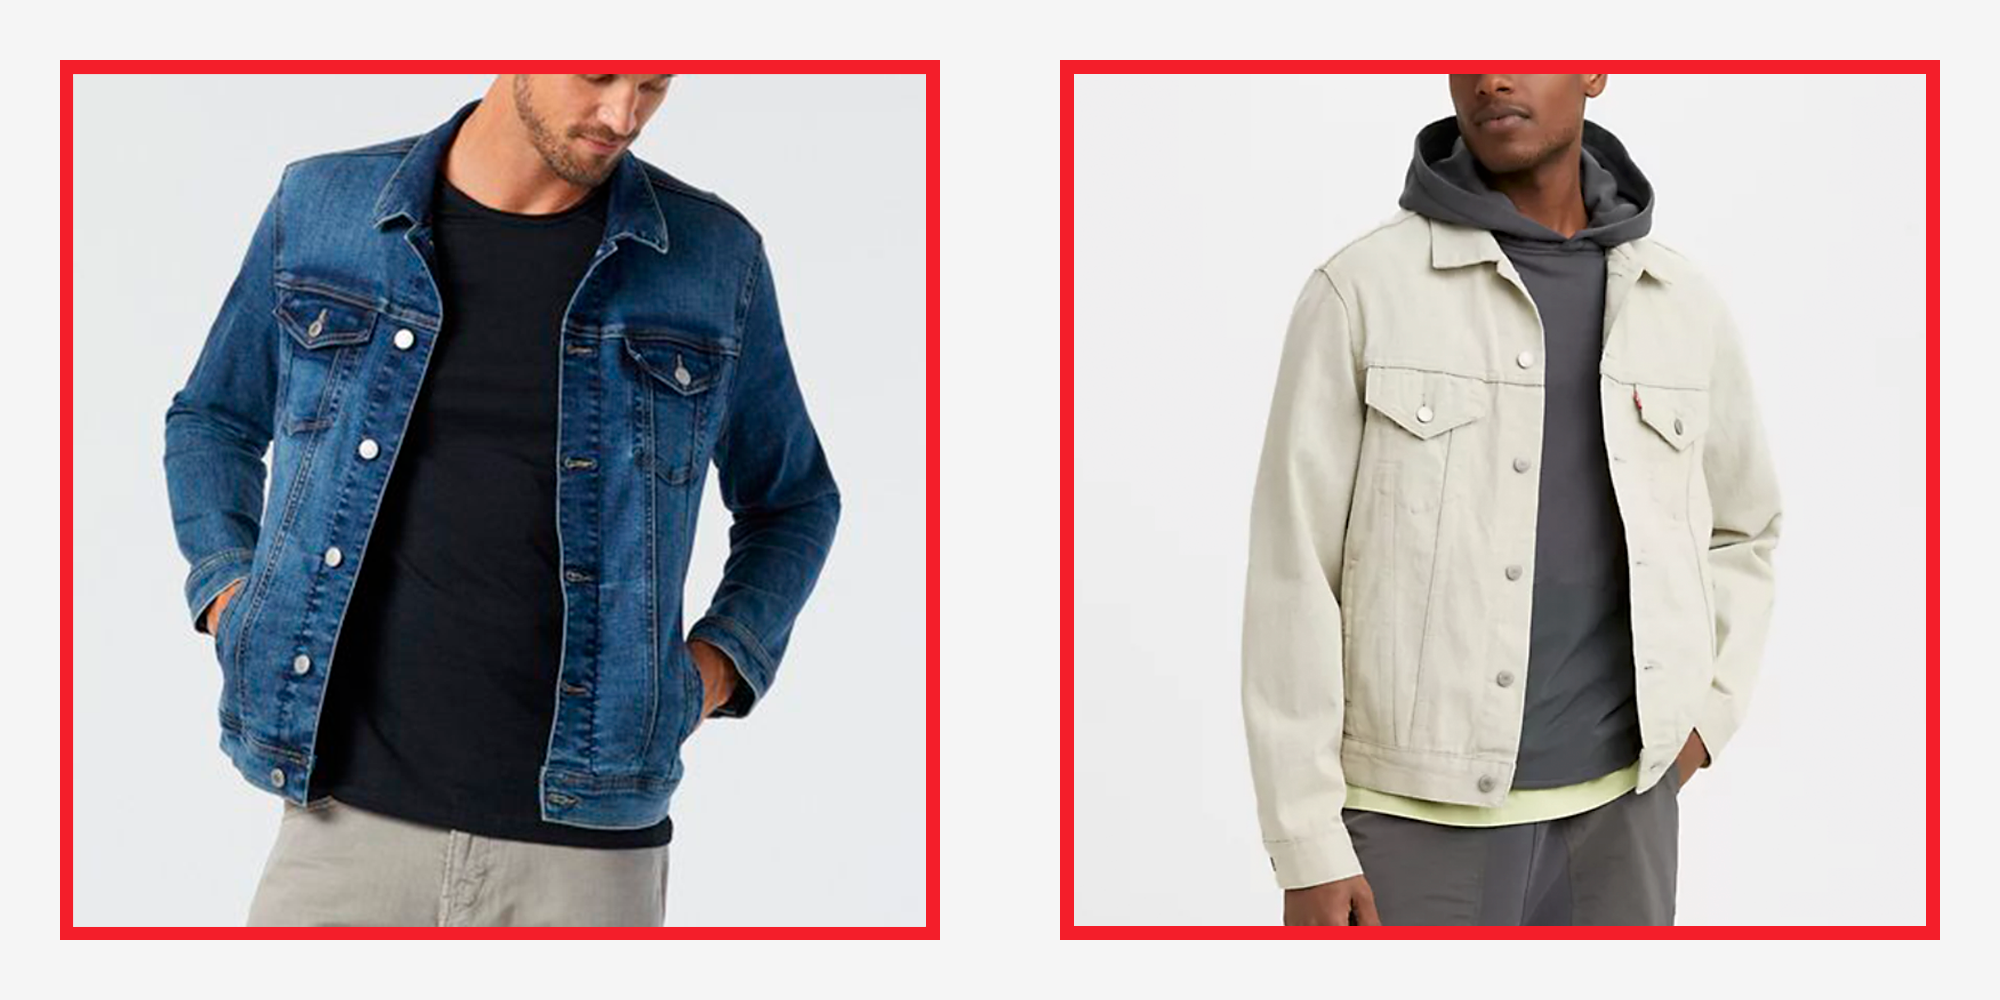 Designer Mens Denim Jacket With Ripped Holes White, Black, Red, Pink Casual  Top For Men And Women Streetwear, Hip Hop, And Cowboy Style Mens Outerwear  From Goodbag118, $14.81 | DHgate.Com